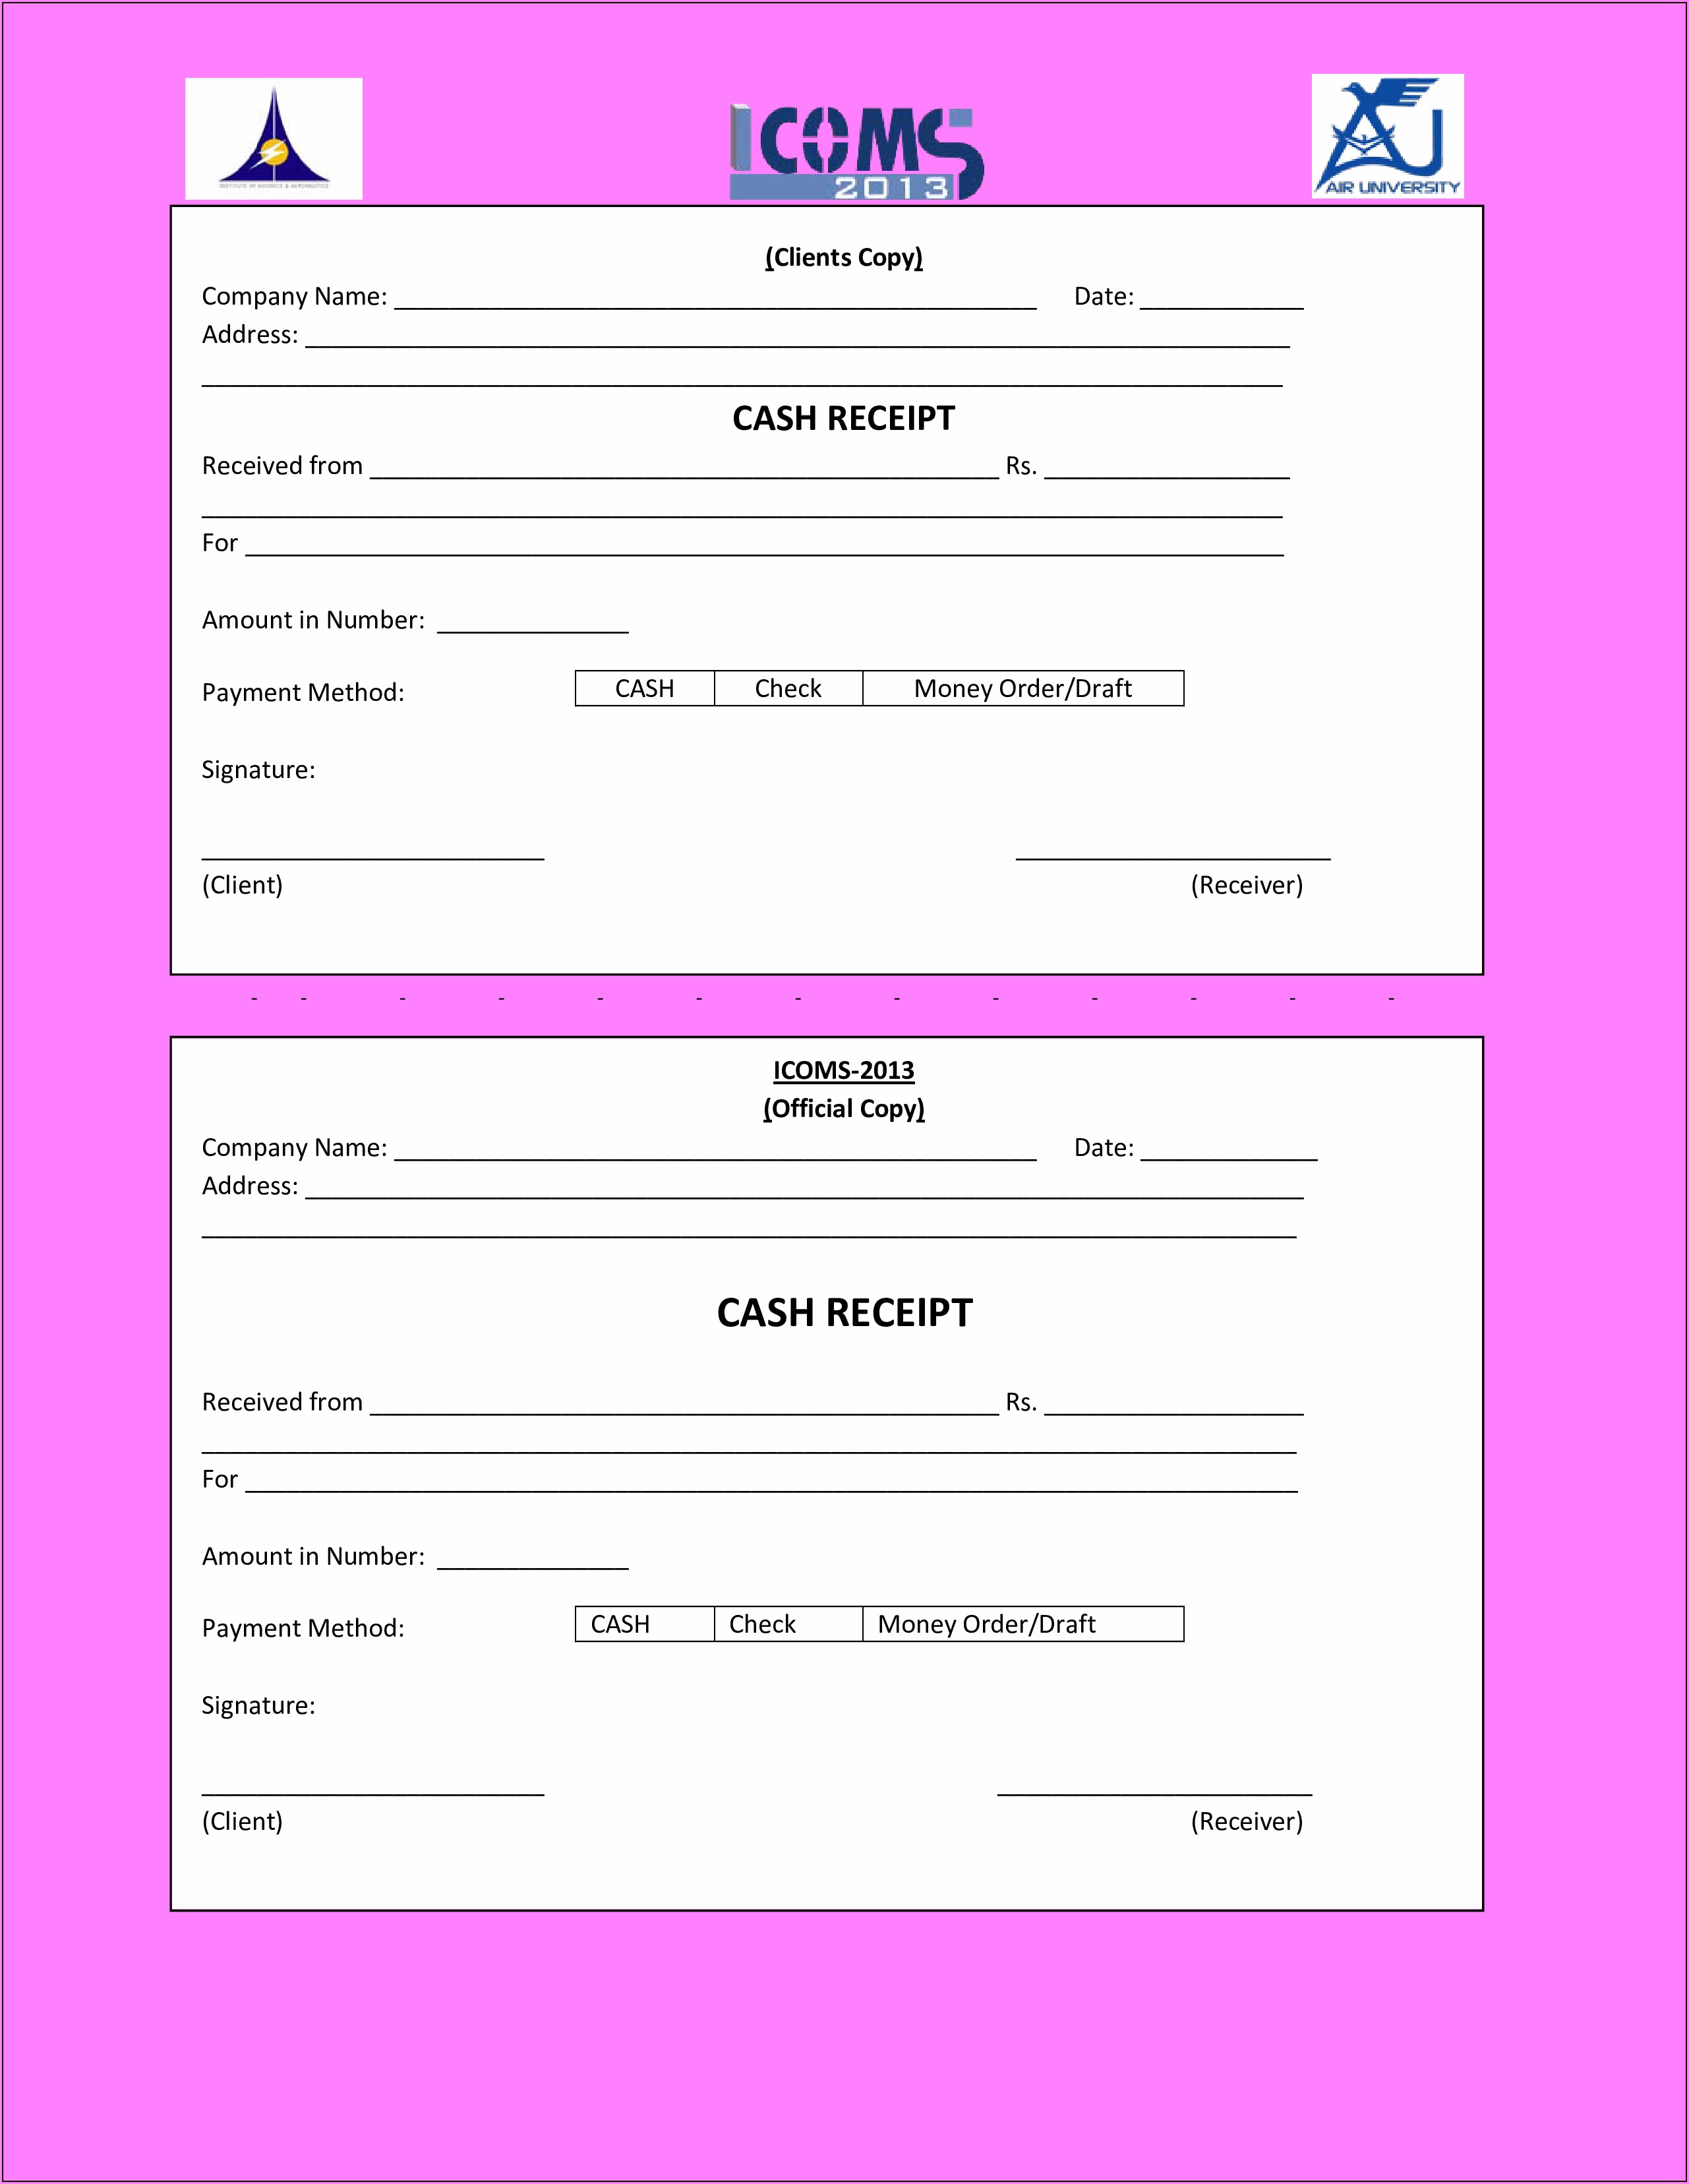 Free Cash Receipt Template Word - Template 1 : Resume Examples #0g27Pmn9Pr